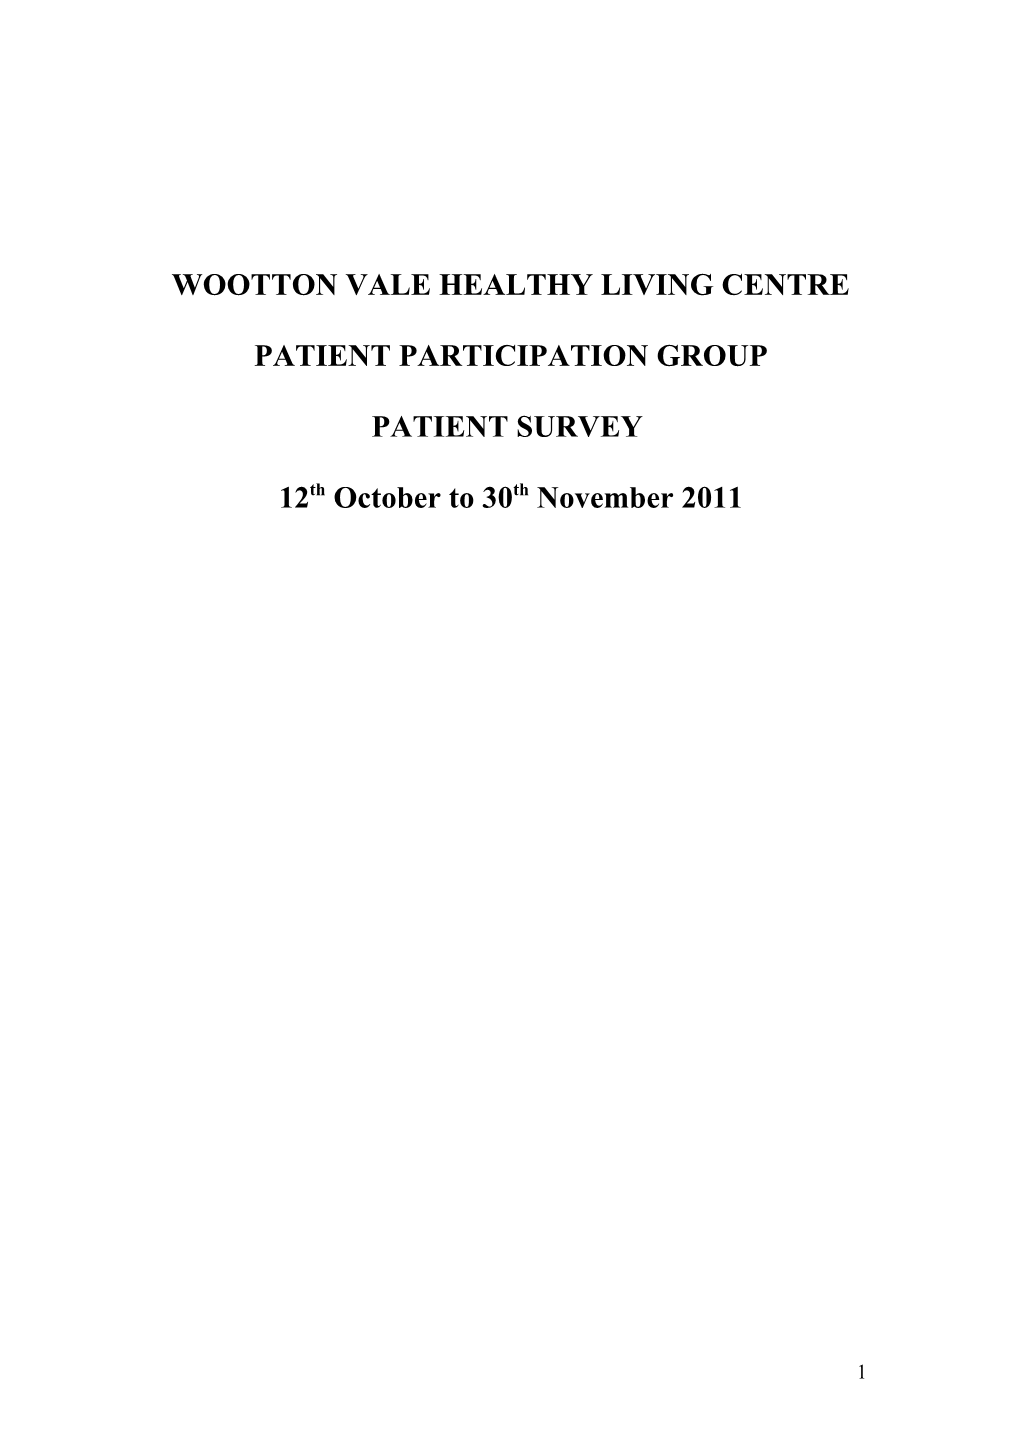 Wootton Vale Healthy Living Centre